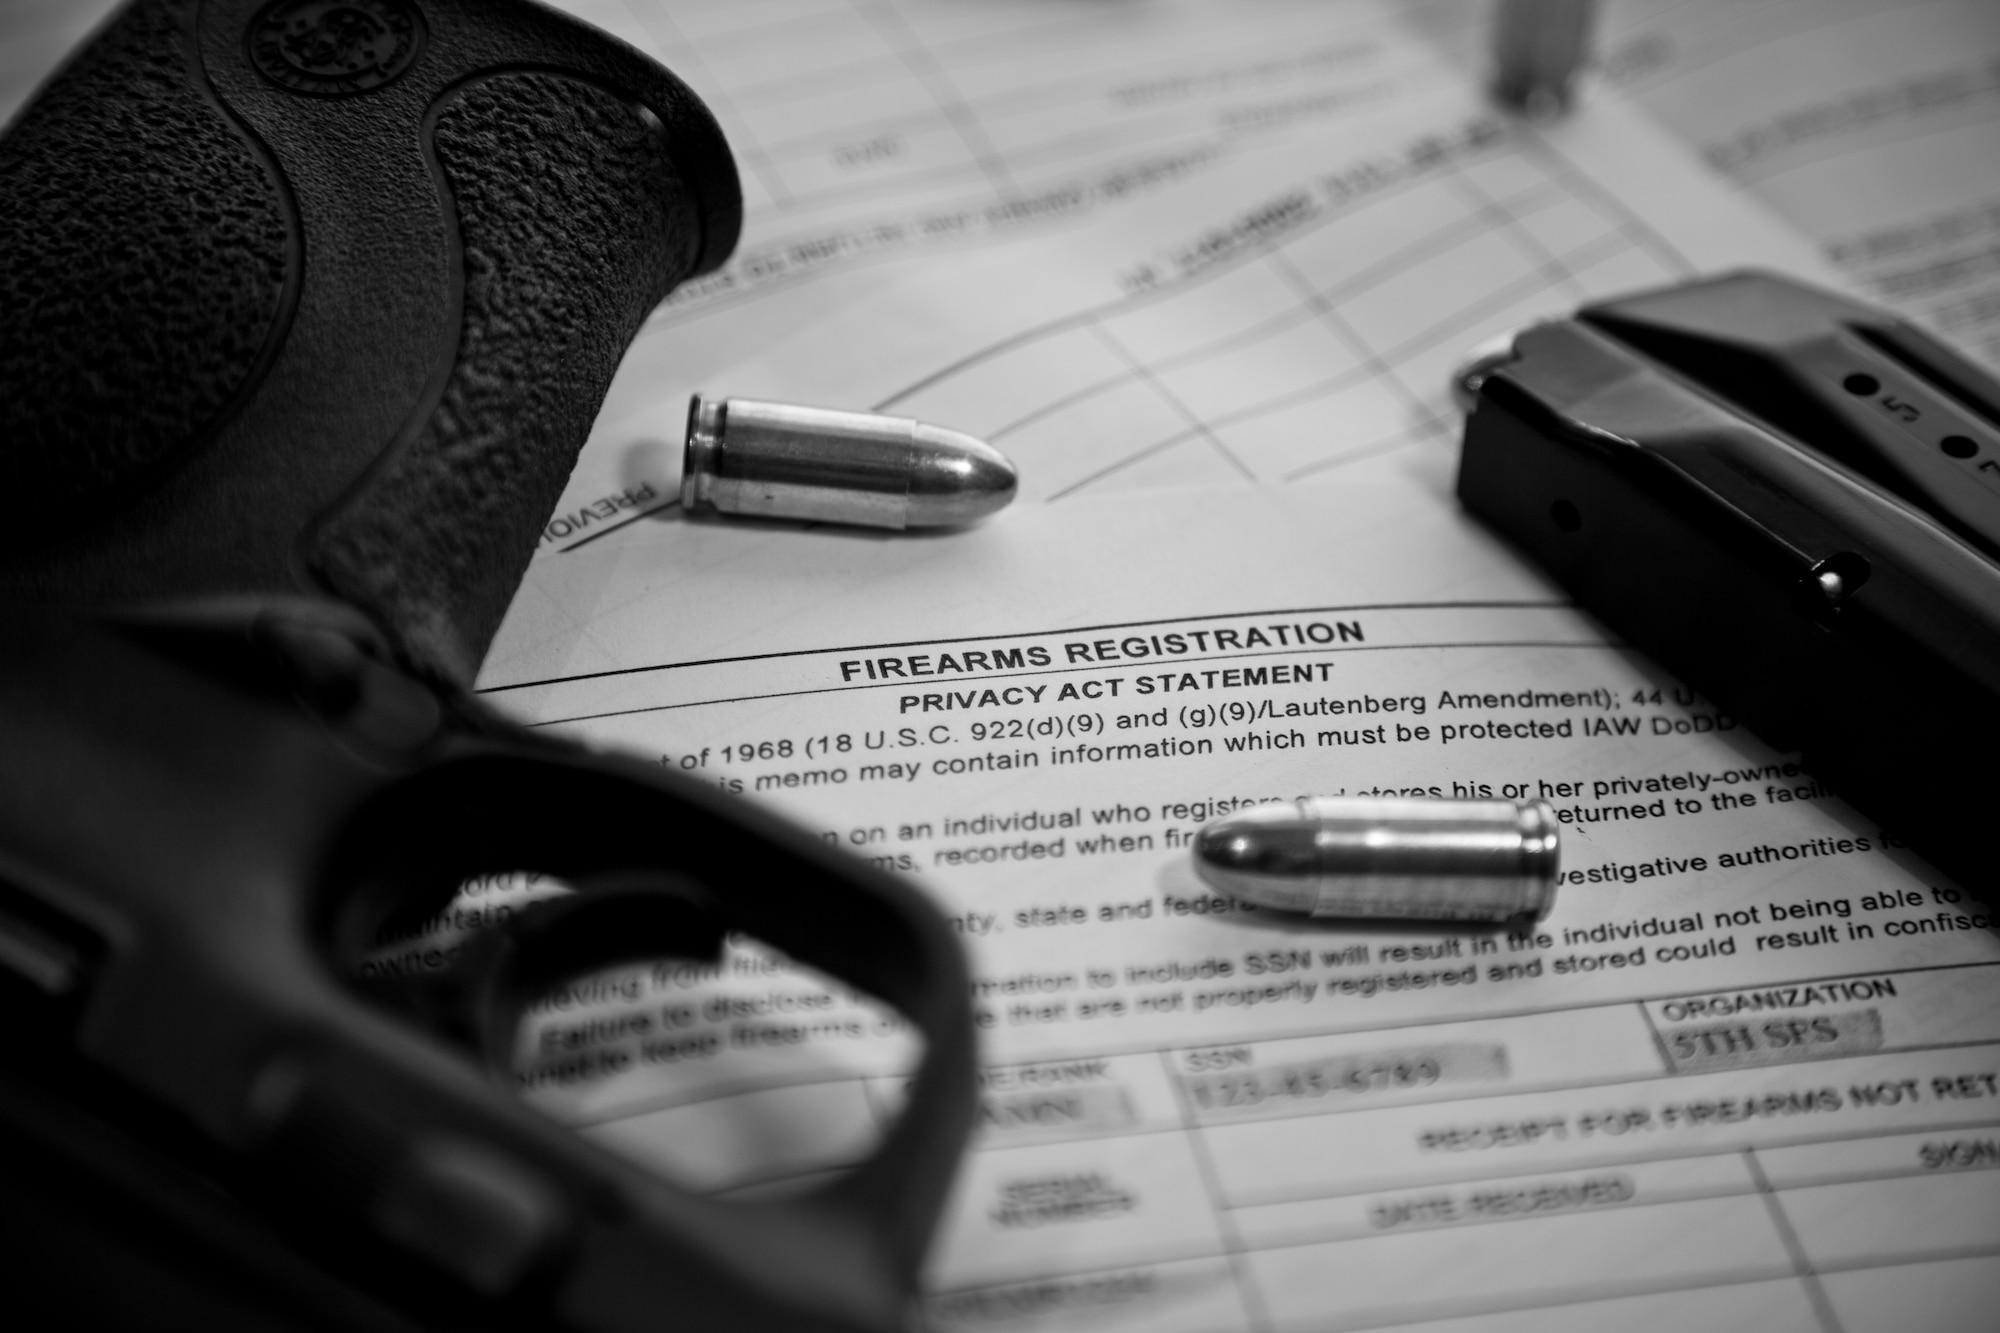 A 9 mm pistol and ammunition sit on top of an AF Form 1314 Firearms Registration form and a DD Form 2760 Qualification to Possess Firearms or Ammunitions form at Minot Air Force Base, N.D., July 10, 2015. Personnel in the dormitories, visiting quarters and temporary lodging facilities are required to store their weapons at the Armory, according to the memorandum from the 5th SFS Armory for the permanent entry or removal of personally owned weapons. (U.S. Air Force photo/Airman 1st Class Justin T. Armstrong)